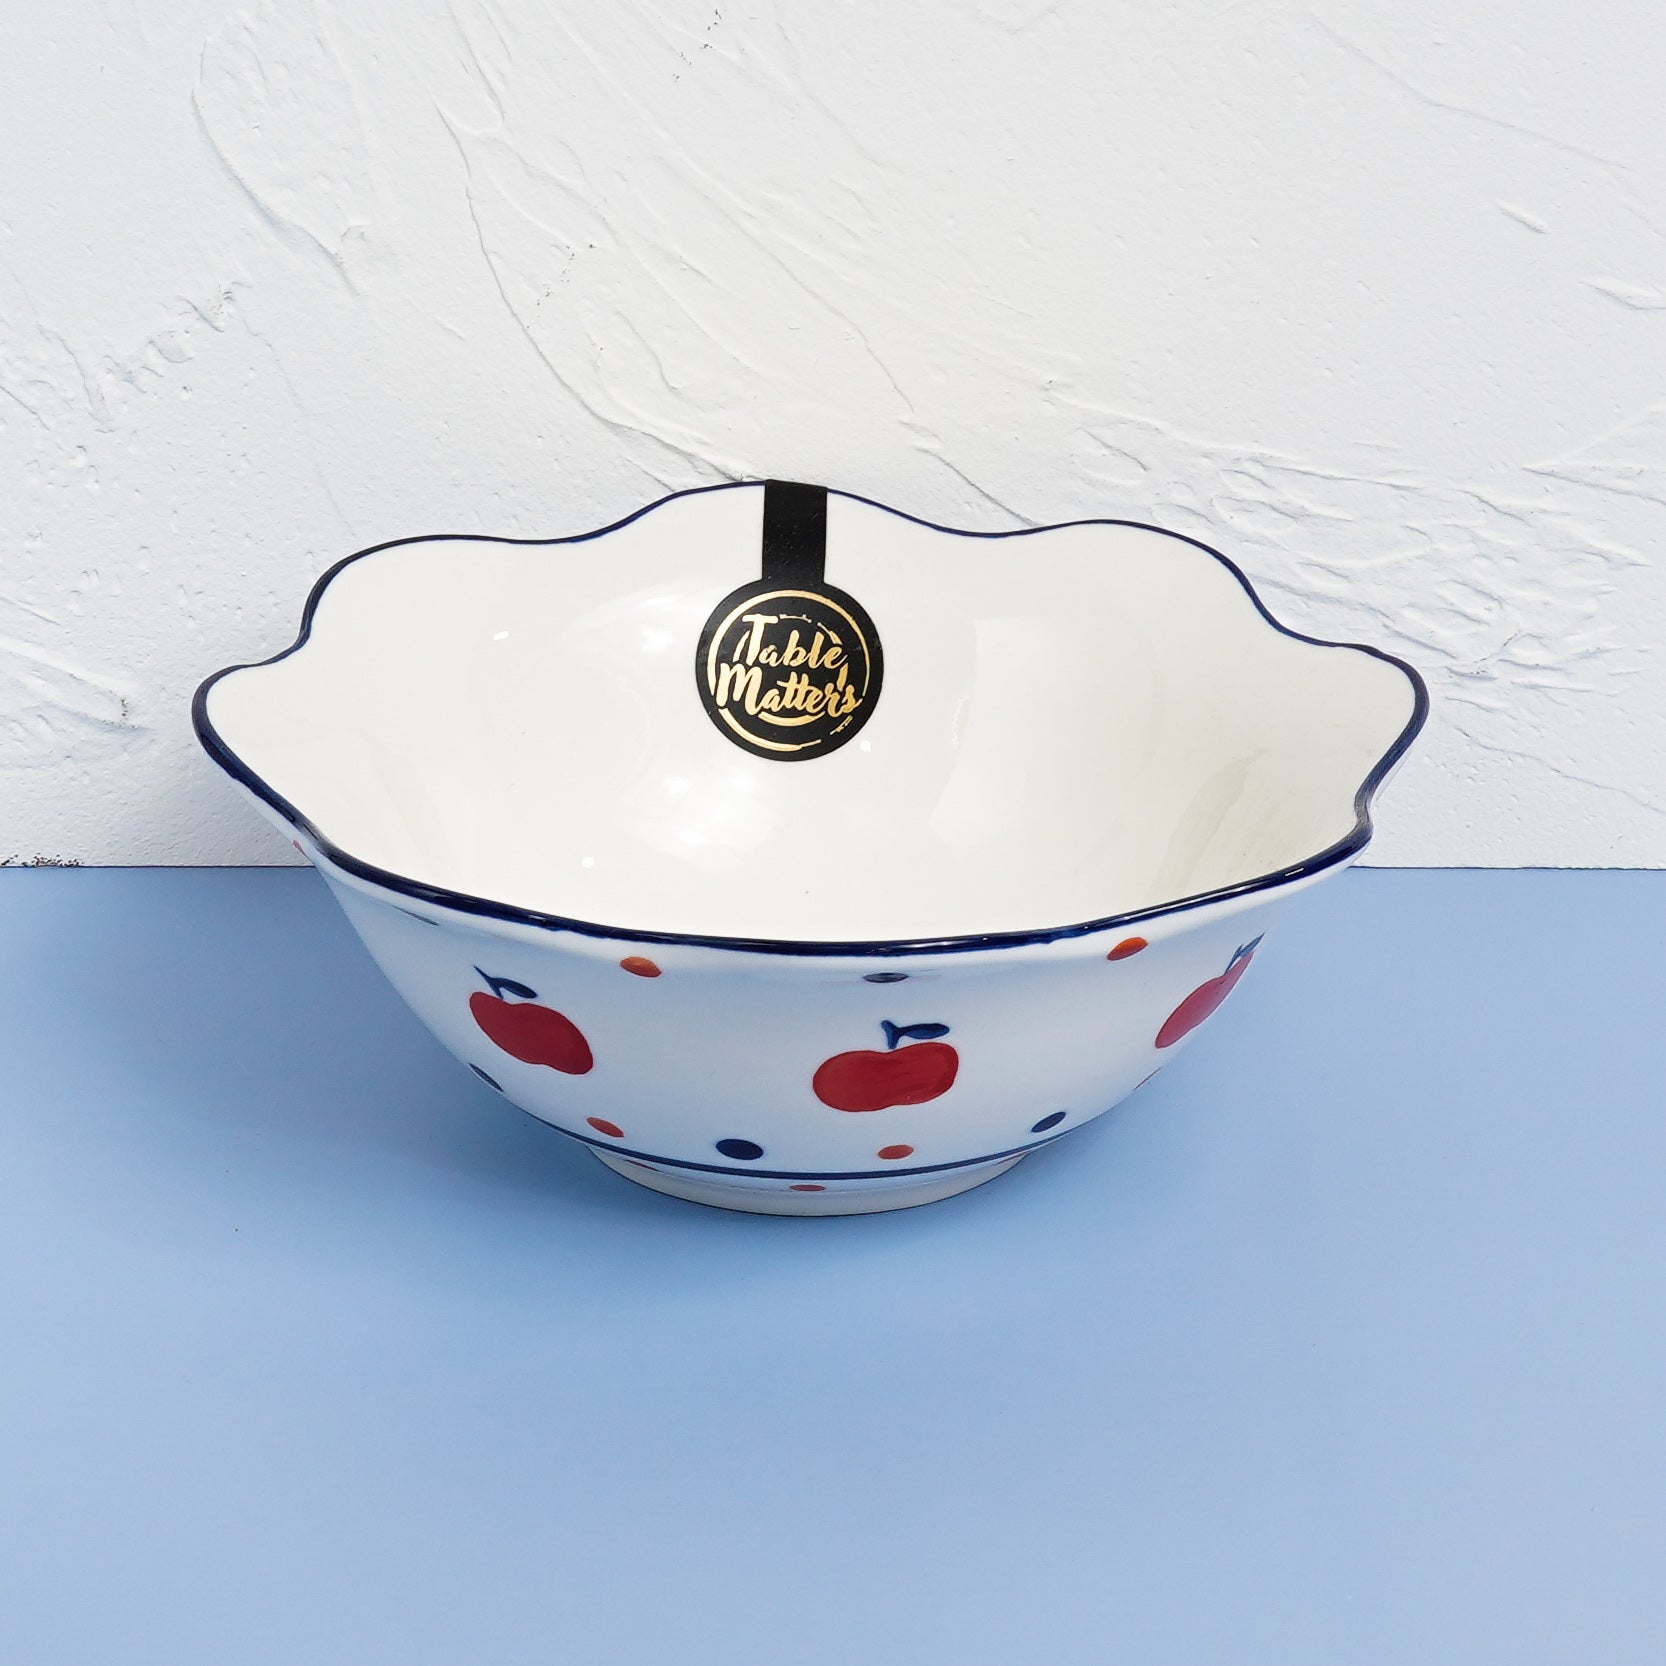 Apple Harvest - Hand Painted 7 inch Scallop Bowl